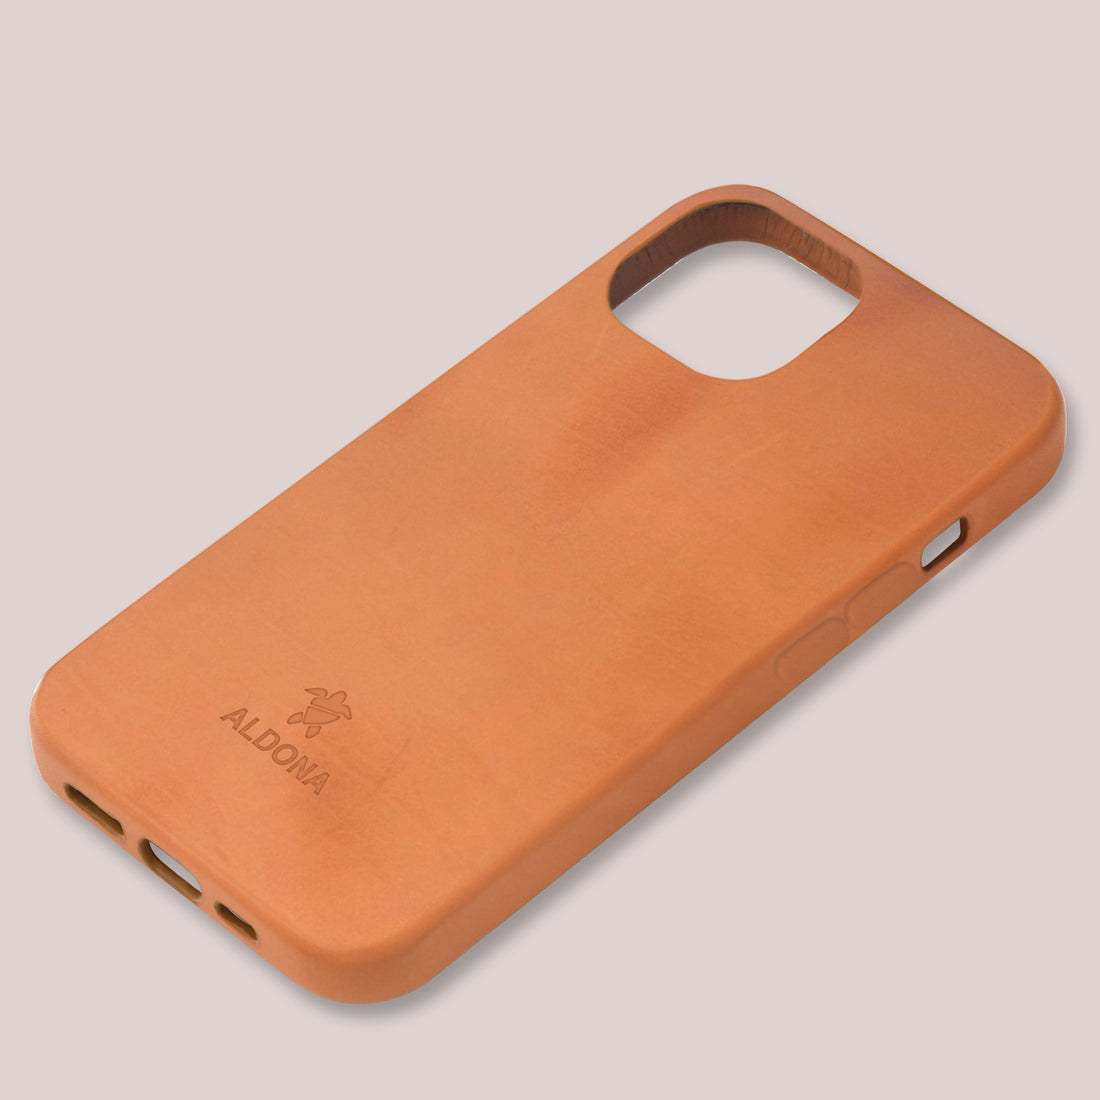 Kalon Case for iPhone 13 Pro with MagSafe Compatibility - Burnt Tobacco